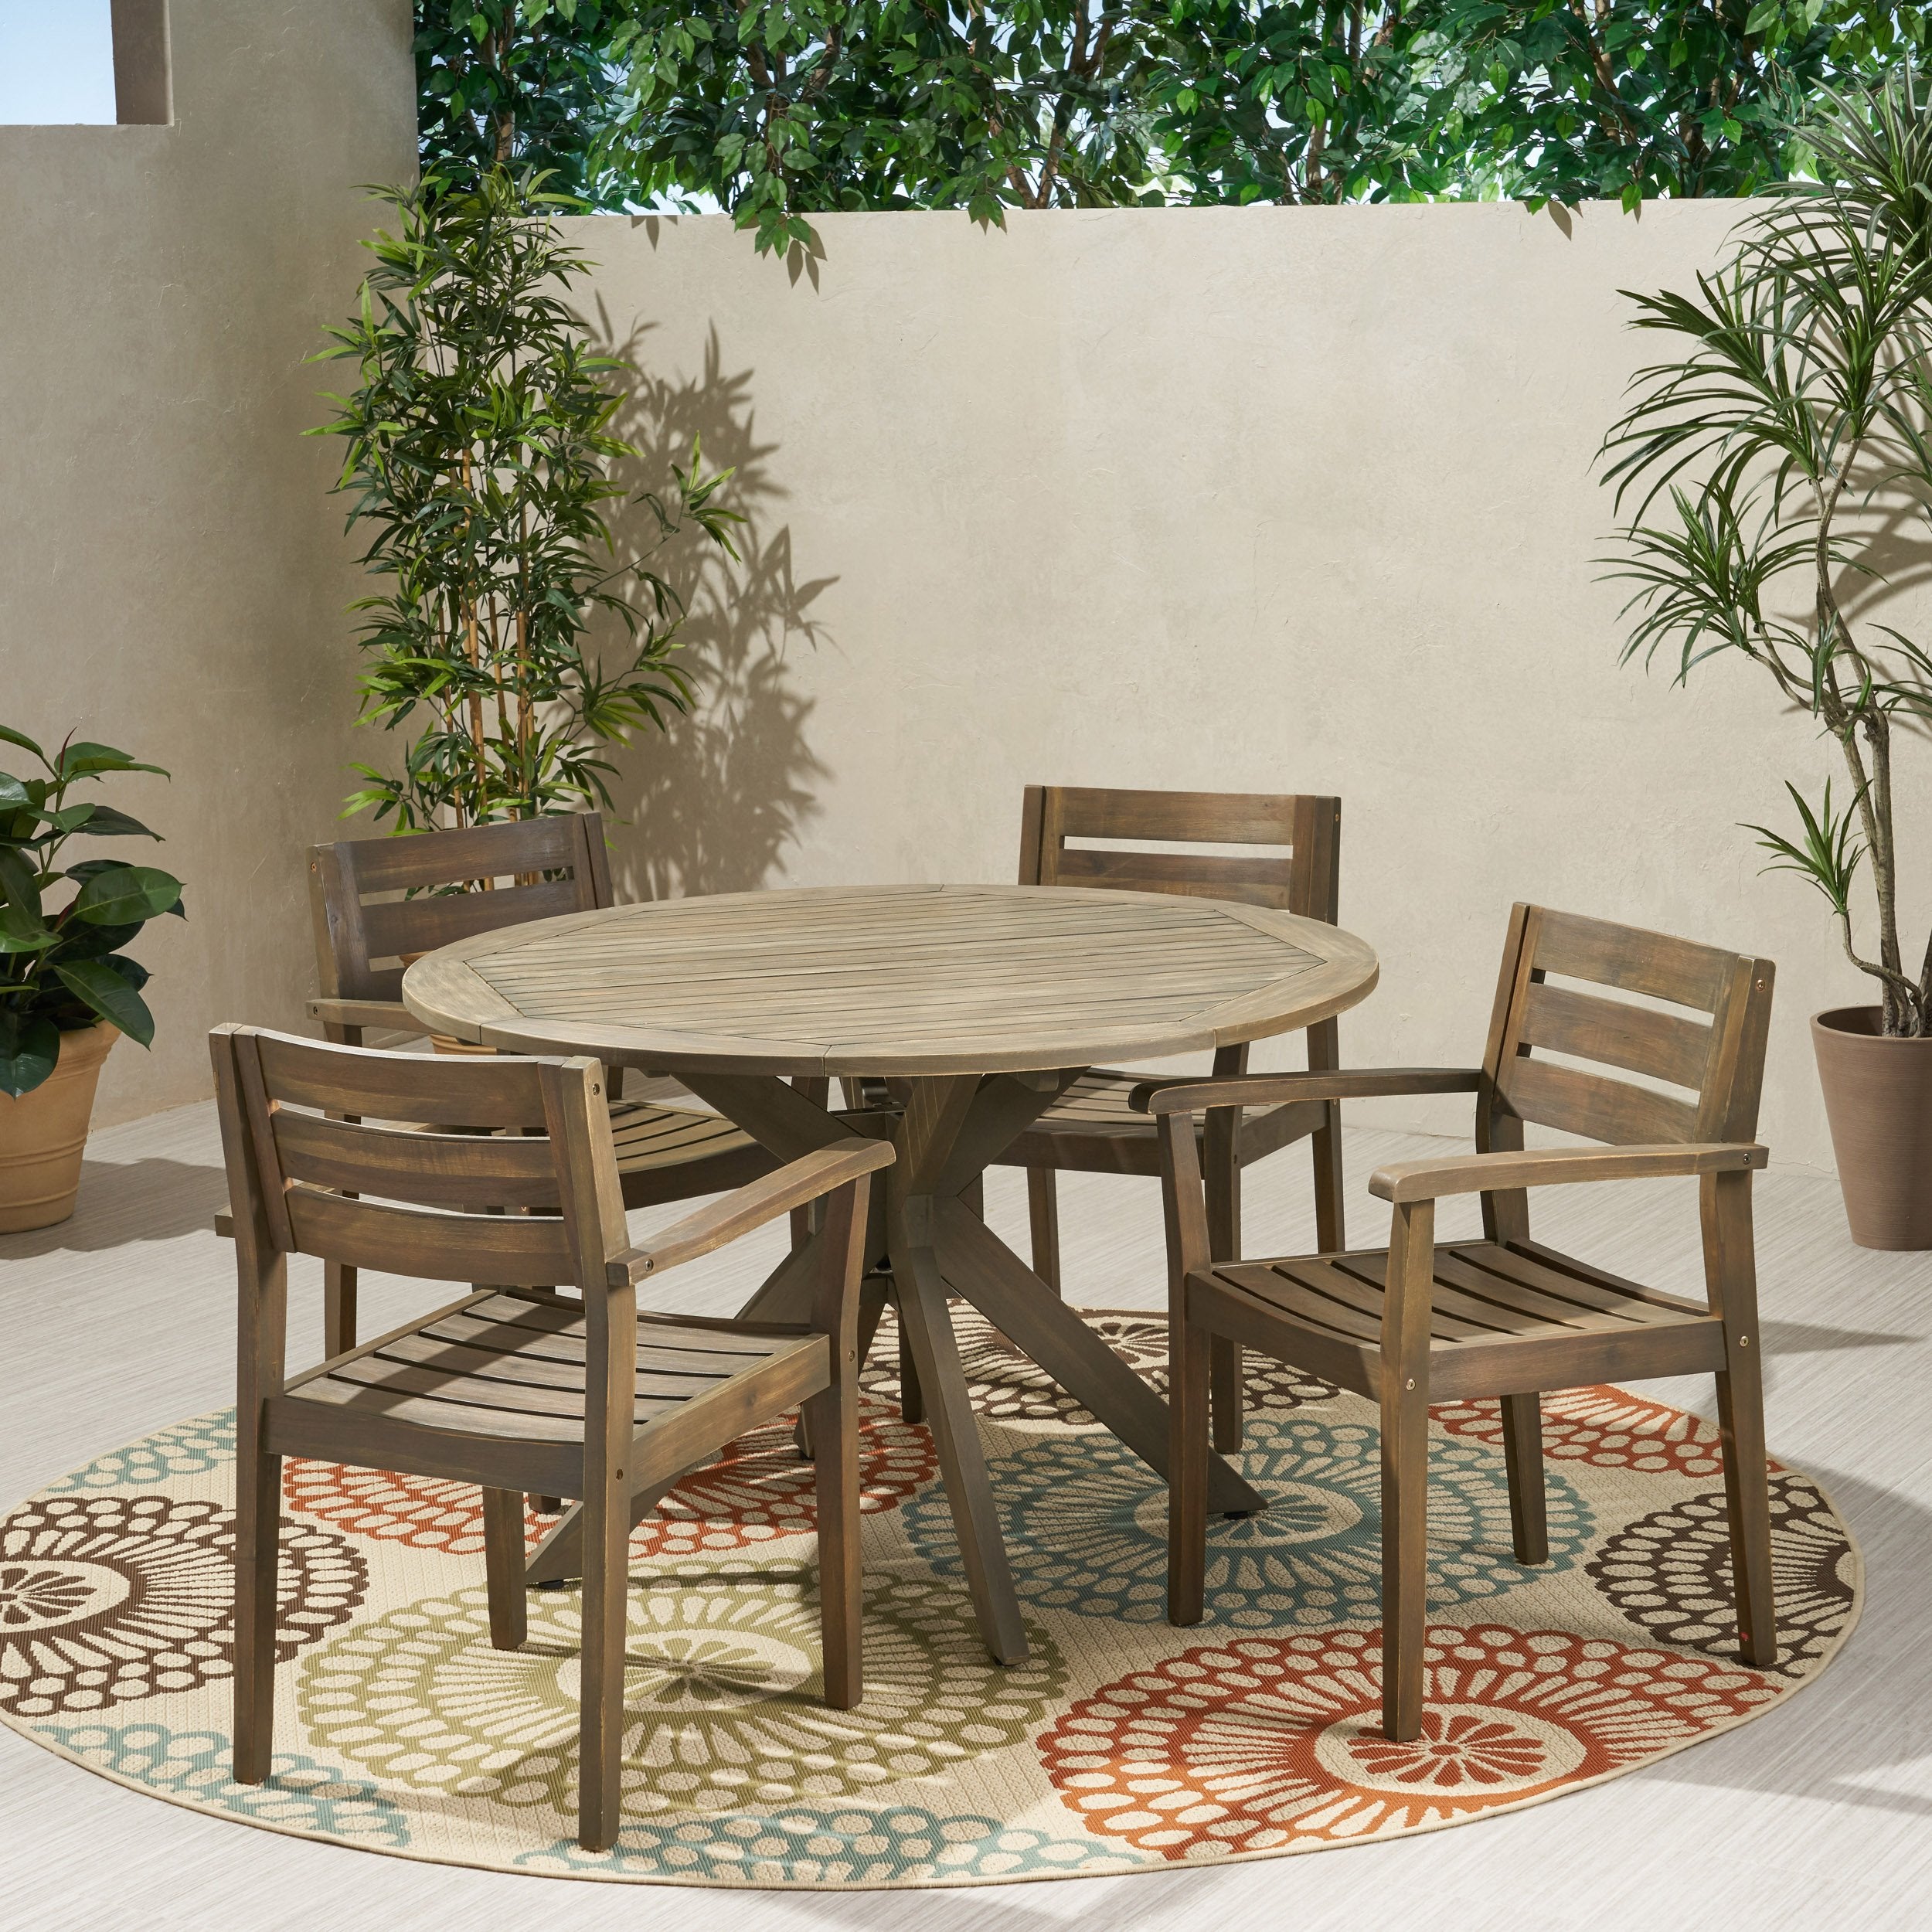 Outdoor 5 Piece Acacia Wood Dining Set With Round Table Gray Finish